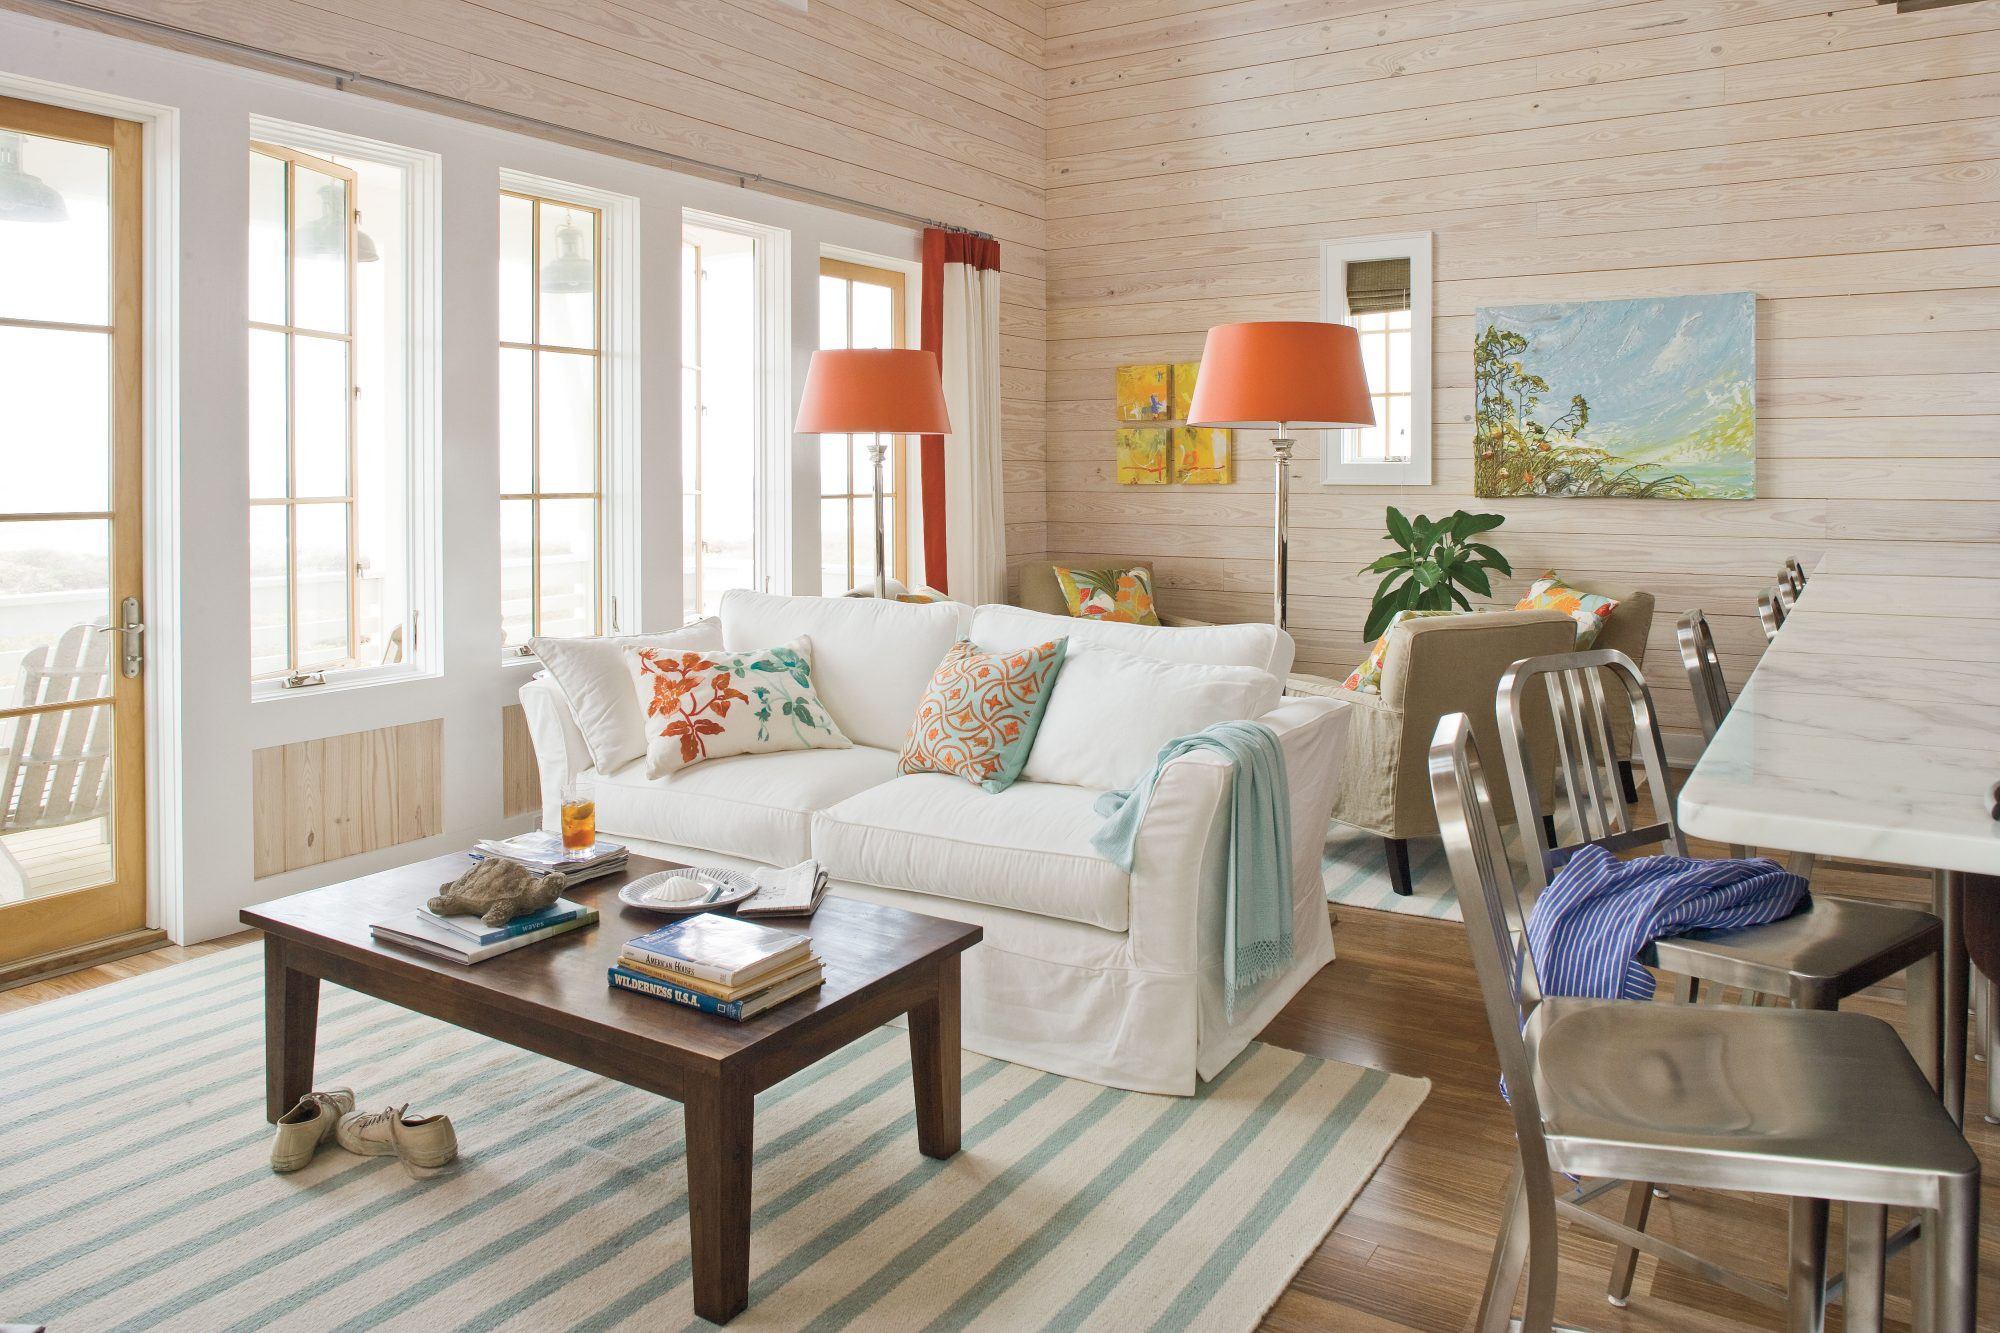 Beach Living Room Decor
 Beach Living Room Decorating Ideas Southern Living